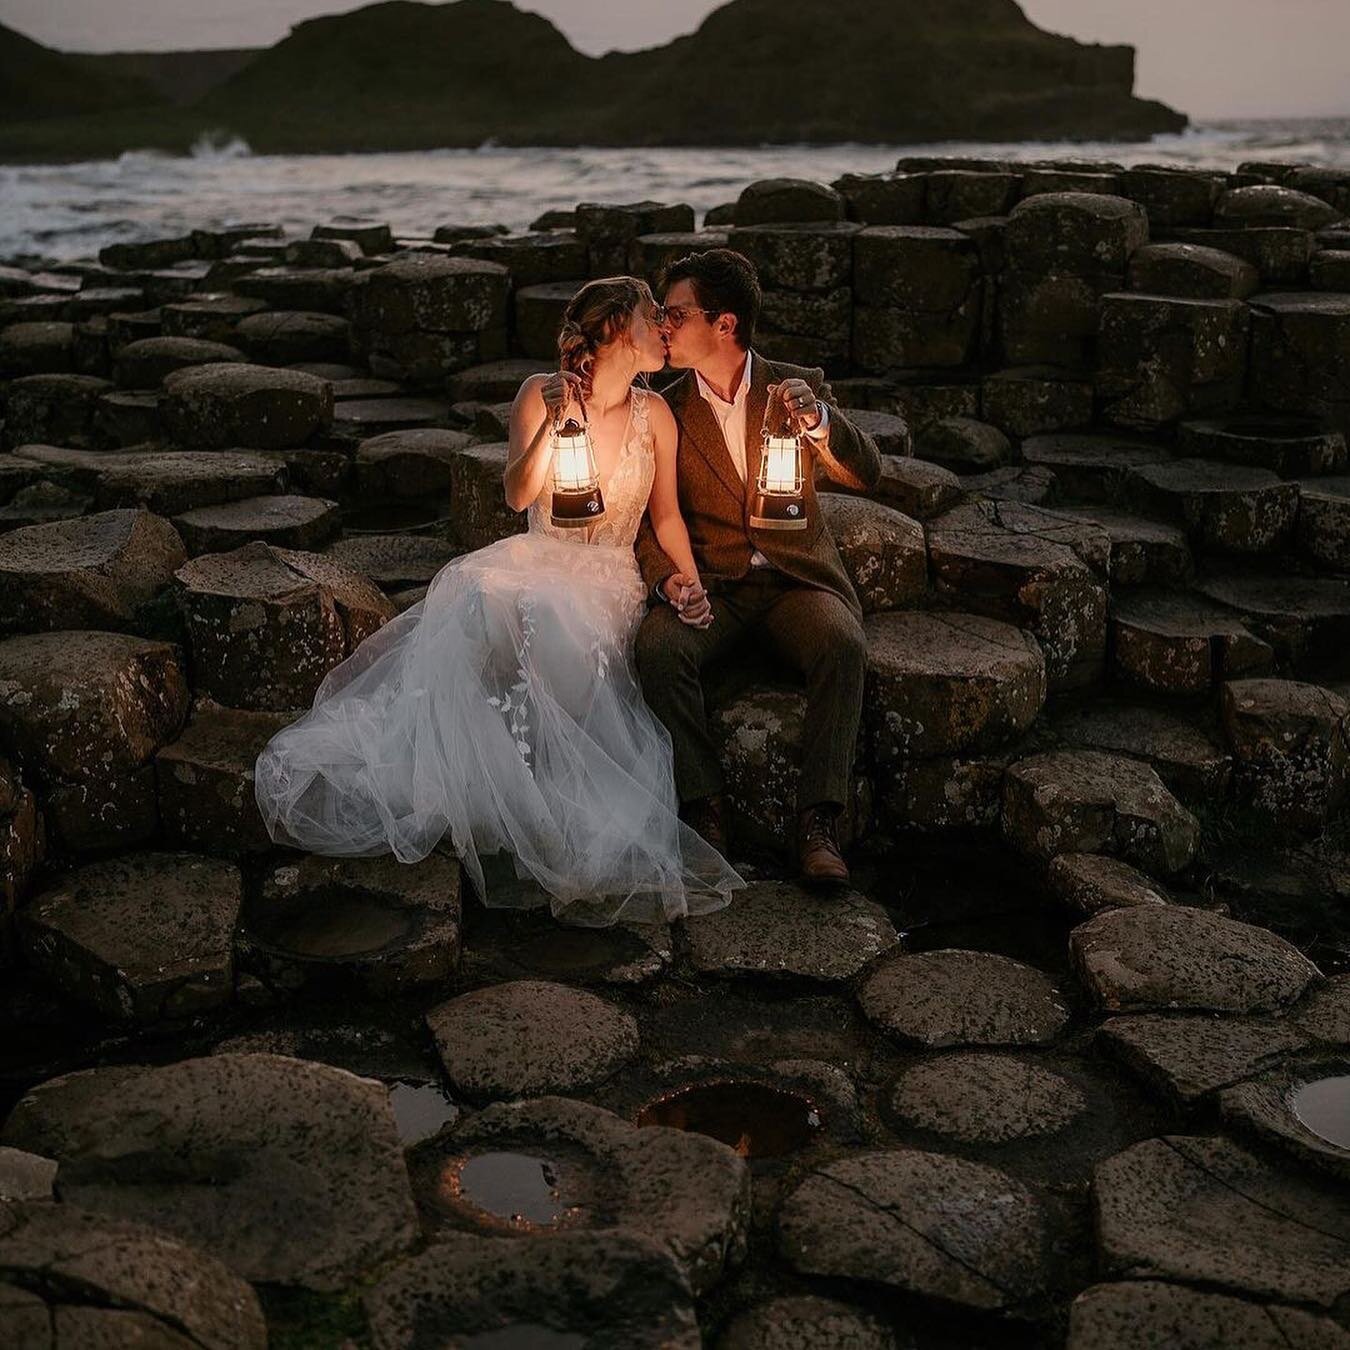 @robdight Jessica &amp; Michael had the most amazing elopement day! They flew in from Florida, 🇺🇸🇺🇸🇺🇸 to elope in Northern Ireland. An intimate ceremony with a handful of loved ones in attendance followed by personal vows between just the two o